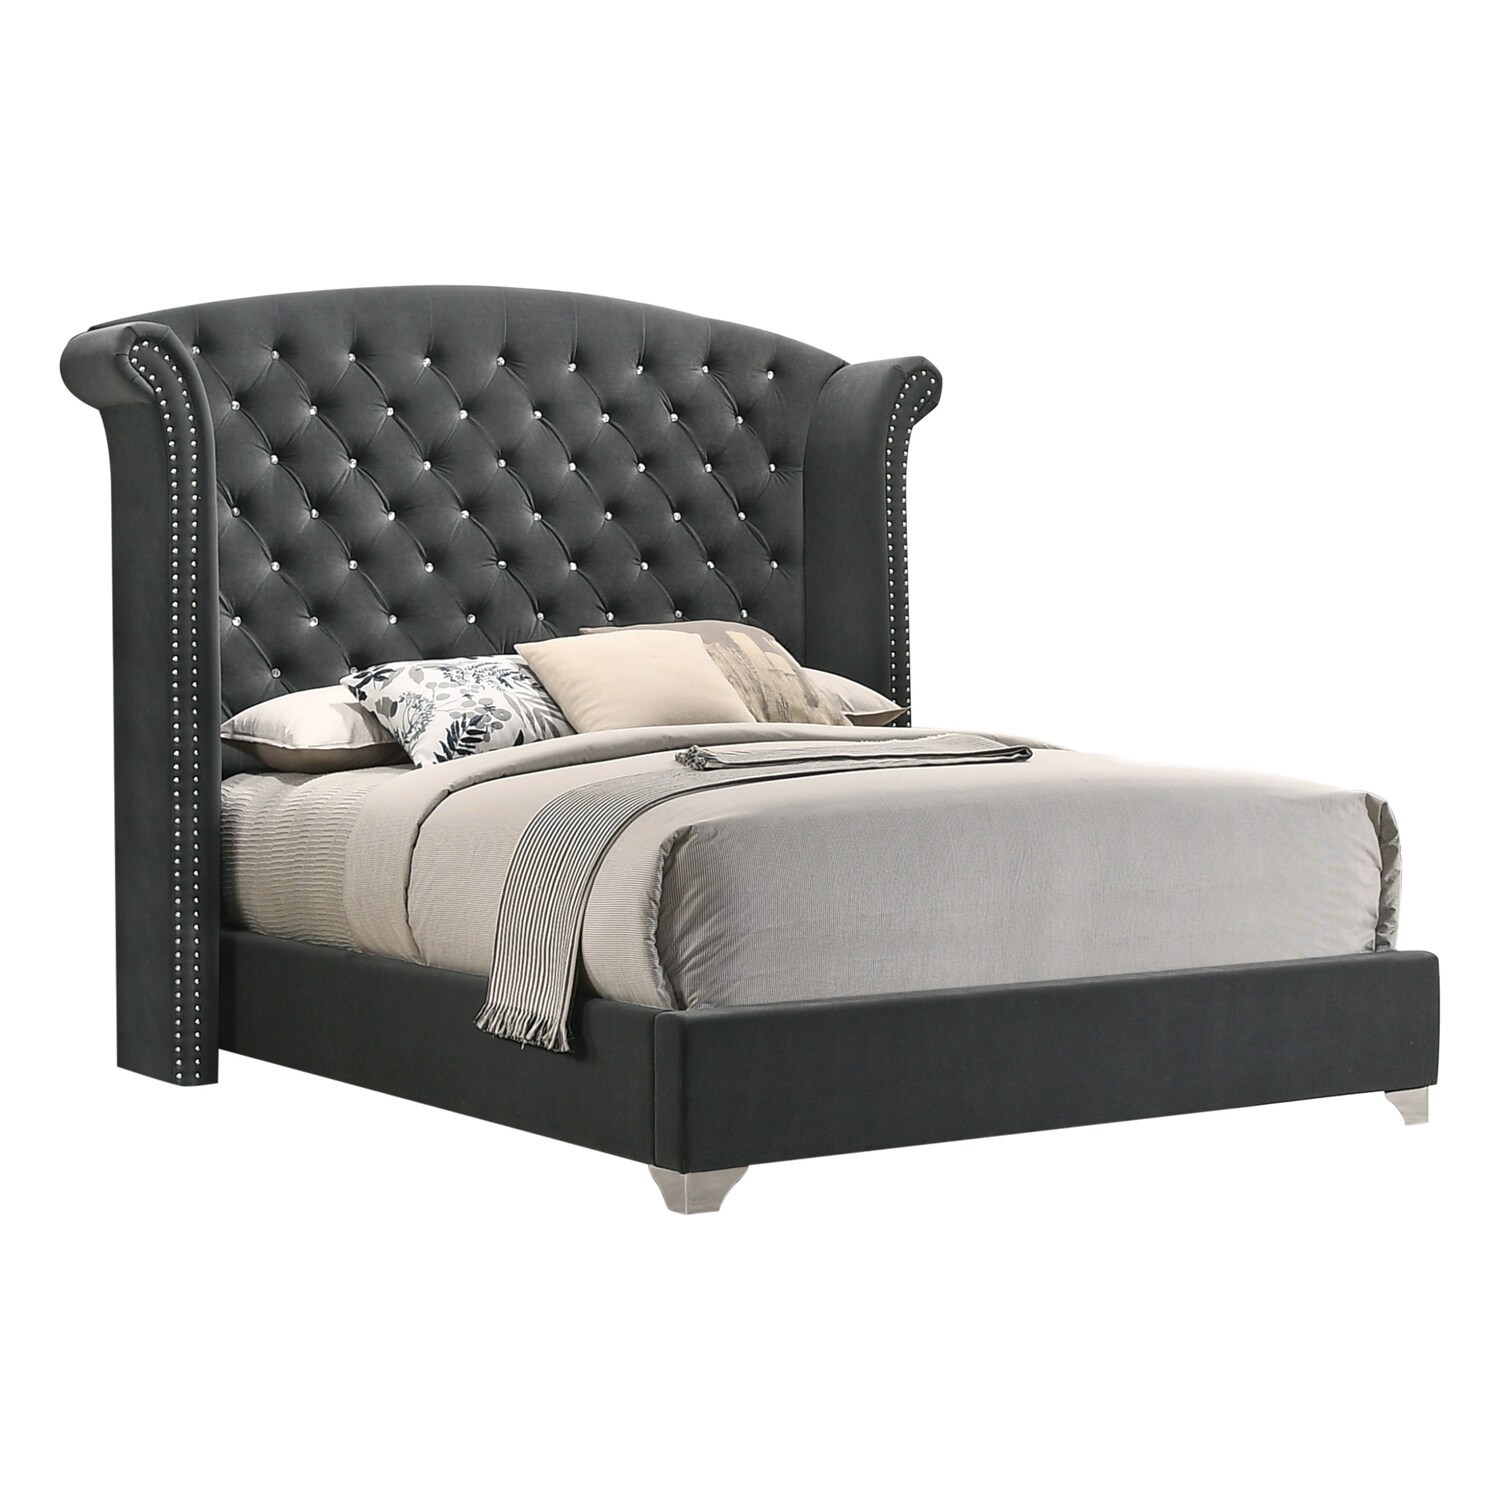 Eastern King Wingback Upholstered Bed